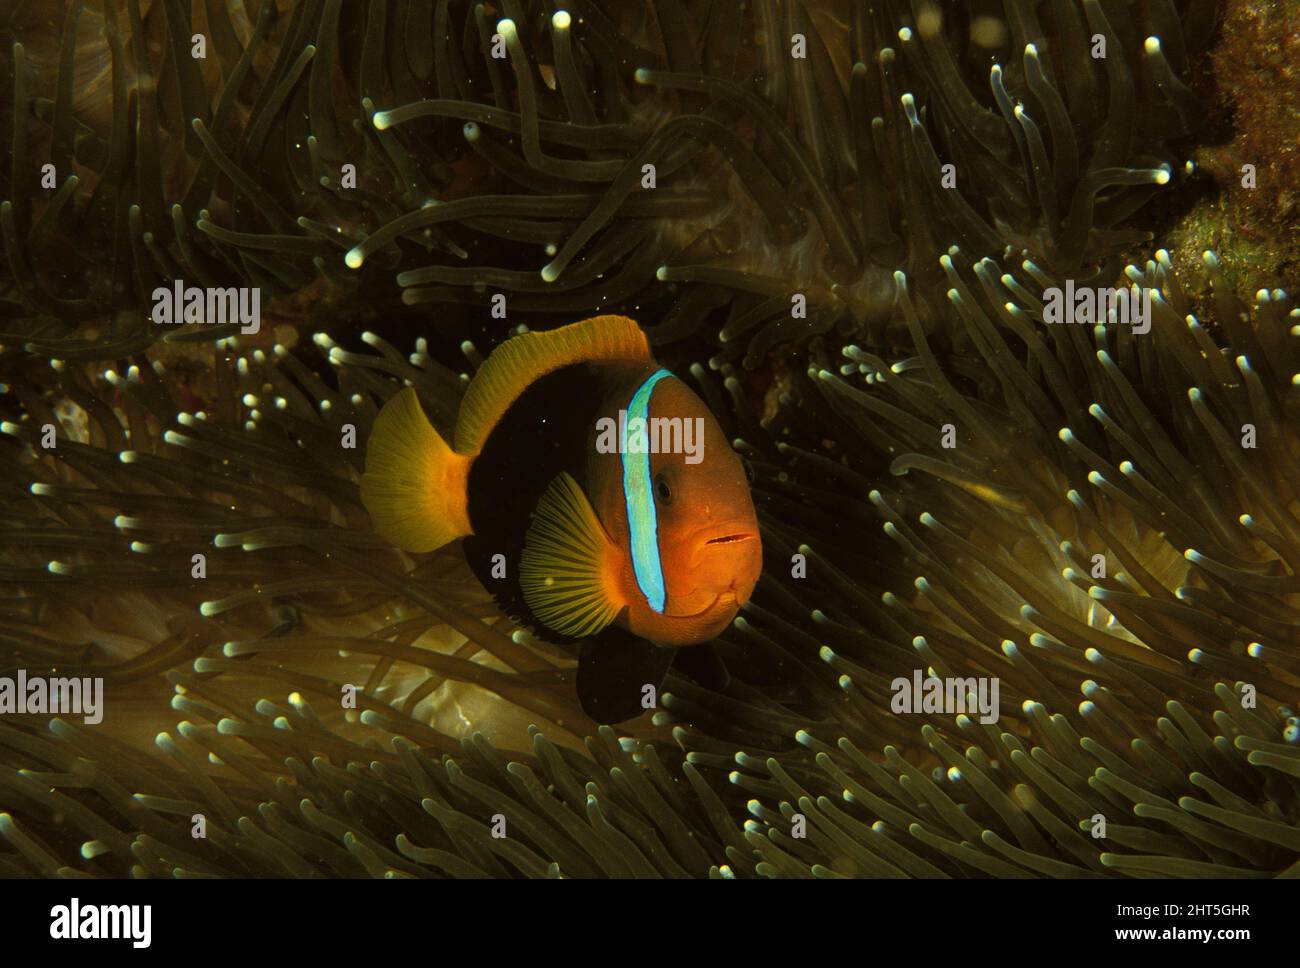 Fire clownfish (Amphiprion melanopus) North Solitary Islands, New South Wales, Australia Stock Photo